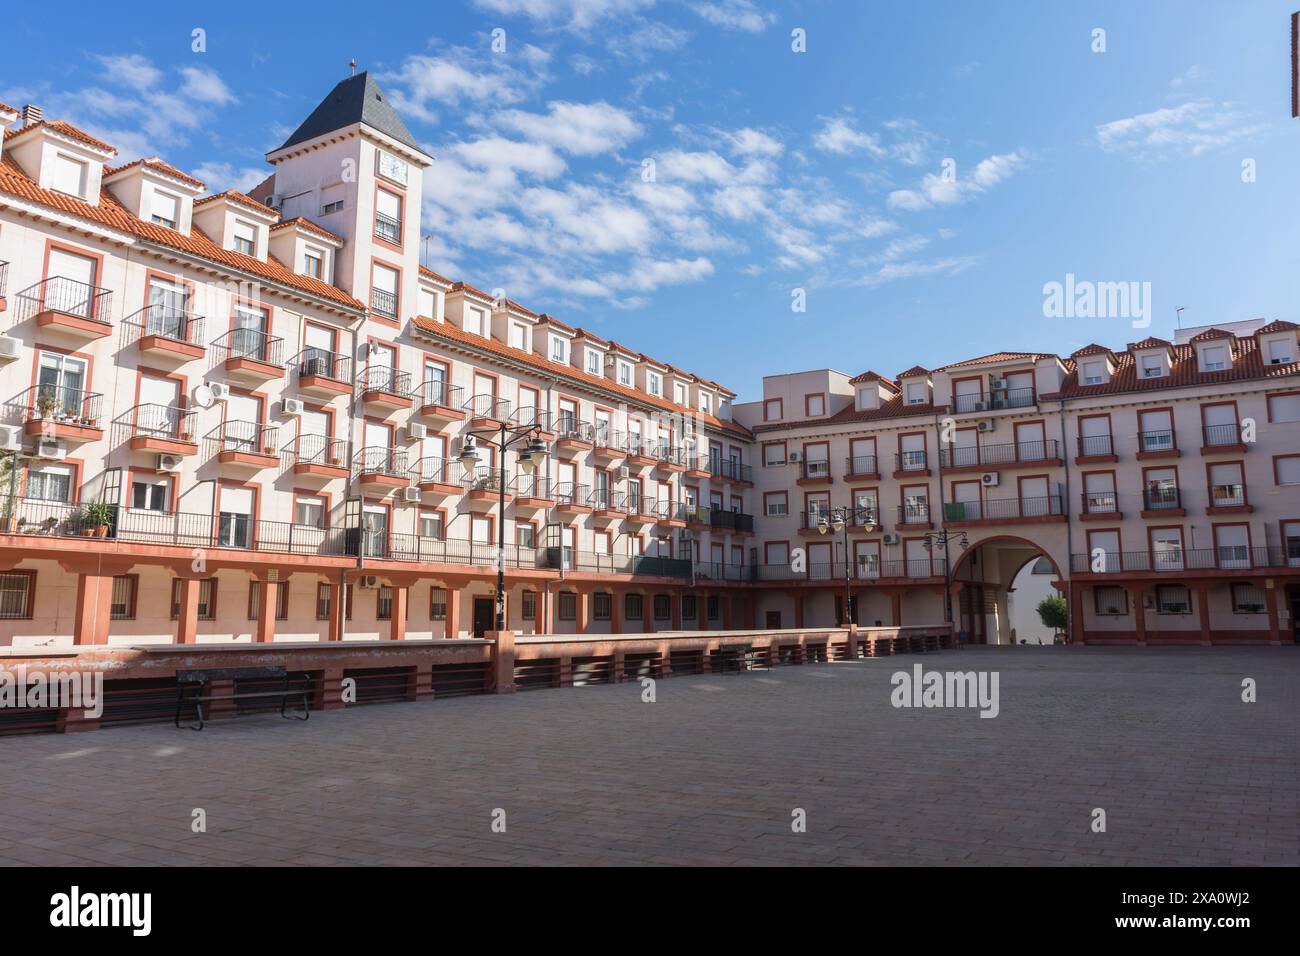 The main square and town hall of Alcazar de San Juan bask under a summer day's bright blue sky. Stock Photo